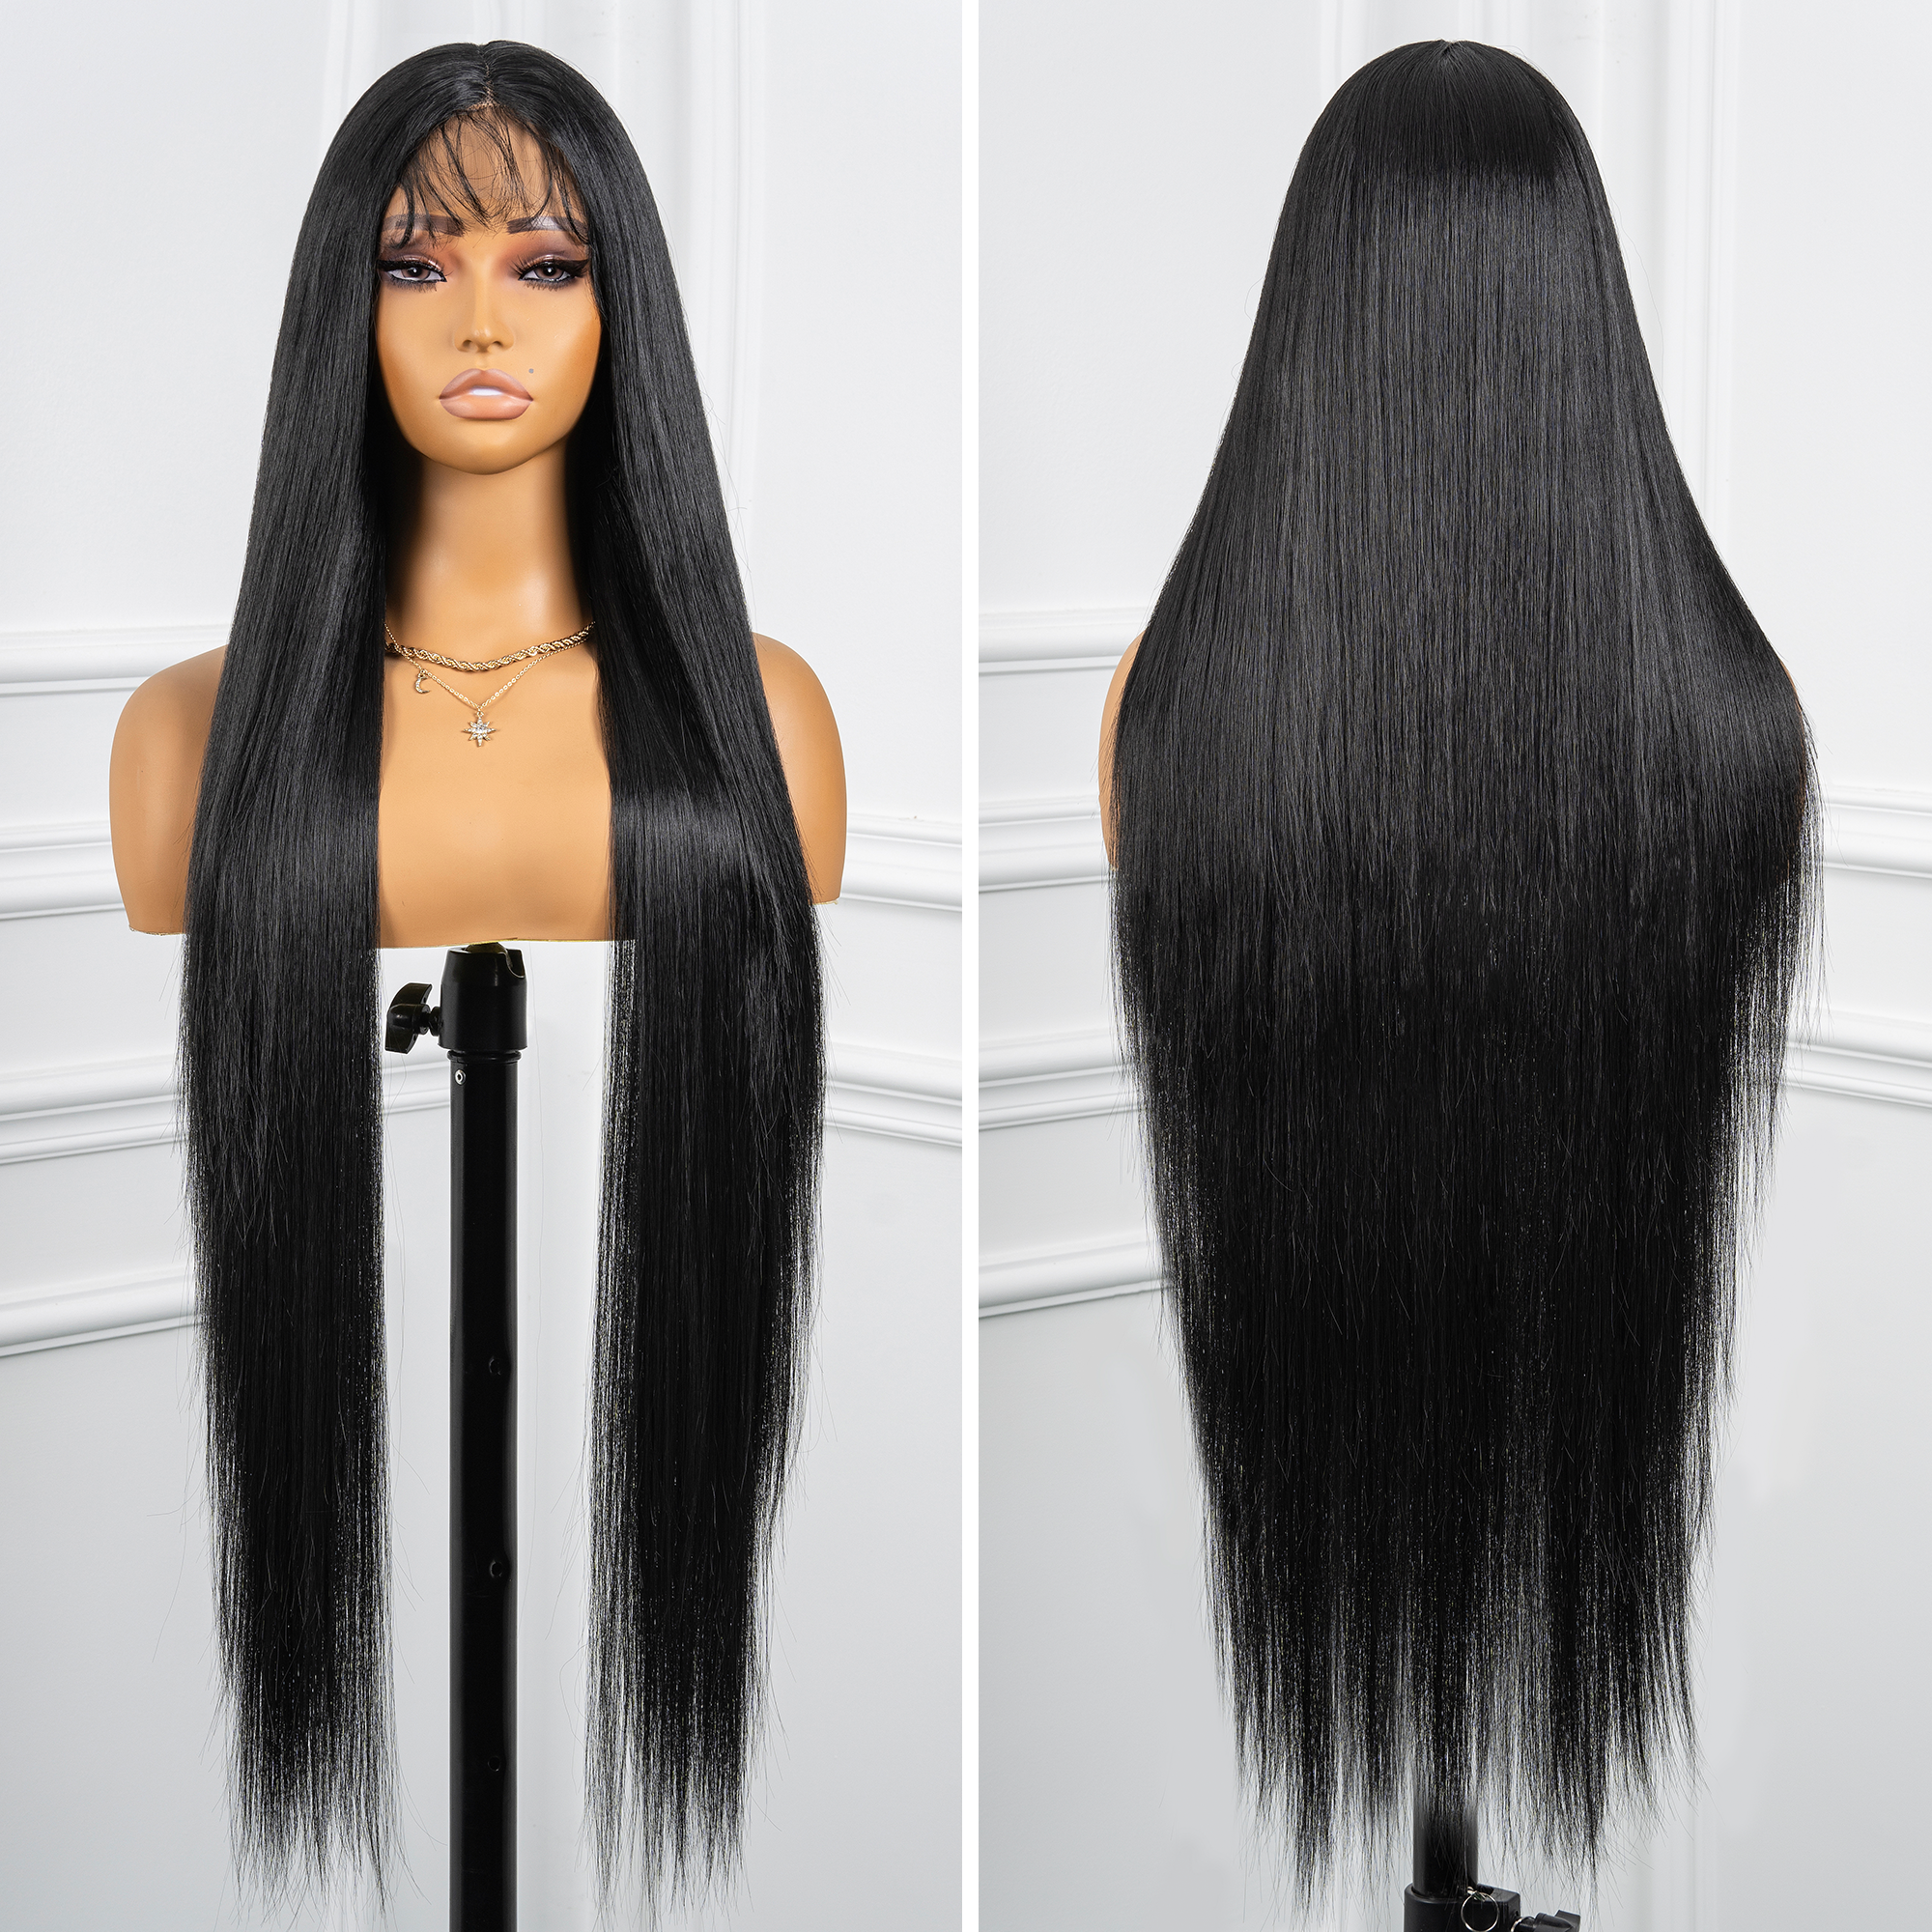 𝓟𝓲𝓼𝓬𝓮𝓼 | TOYOTRESS OUTRE LONG 36 INCH AIRY YAKI STRAIGHT T-MIDDLE PART LACE FRONT WIGS WITH BABY HAIR | 36 INCH SUPER SLAY LONG SOFT HUMAN HAIR RIVAL NATURAL BLACK  WIG(1472)